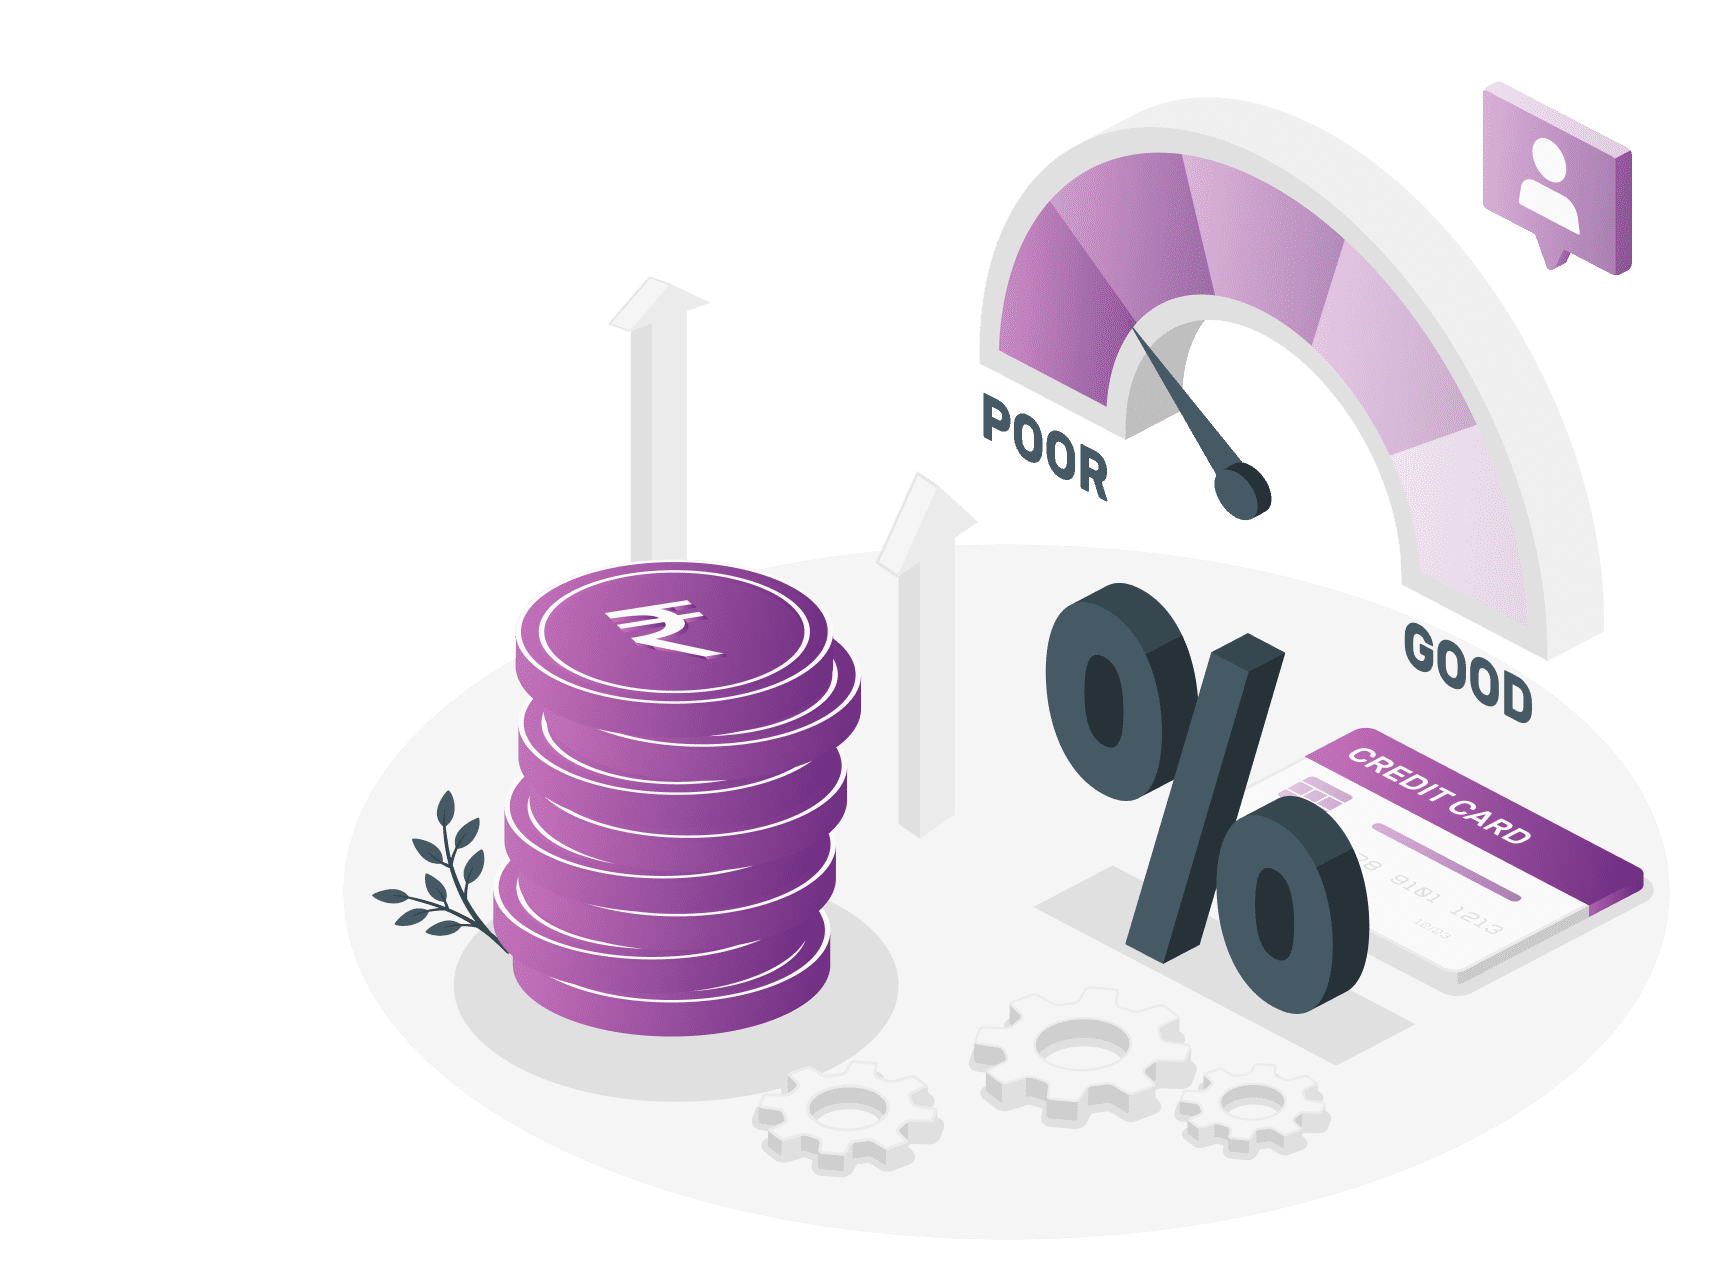 Illustration of financial concepts with a stack of coins, a percentage symbol, gears, a credit card, and a speedometer indicating from poor to good.